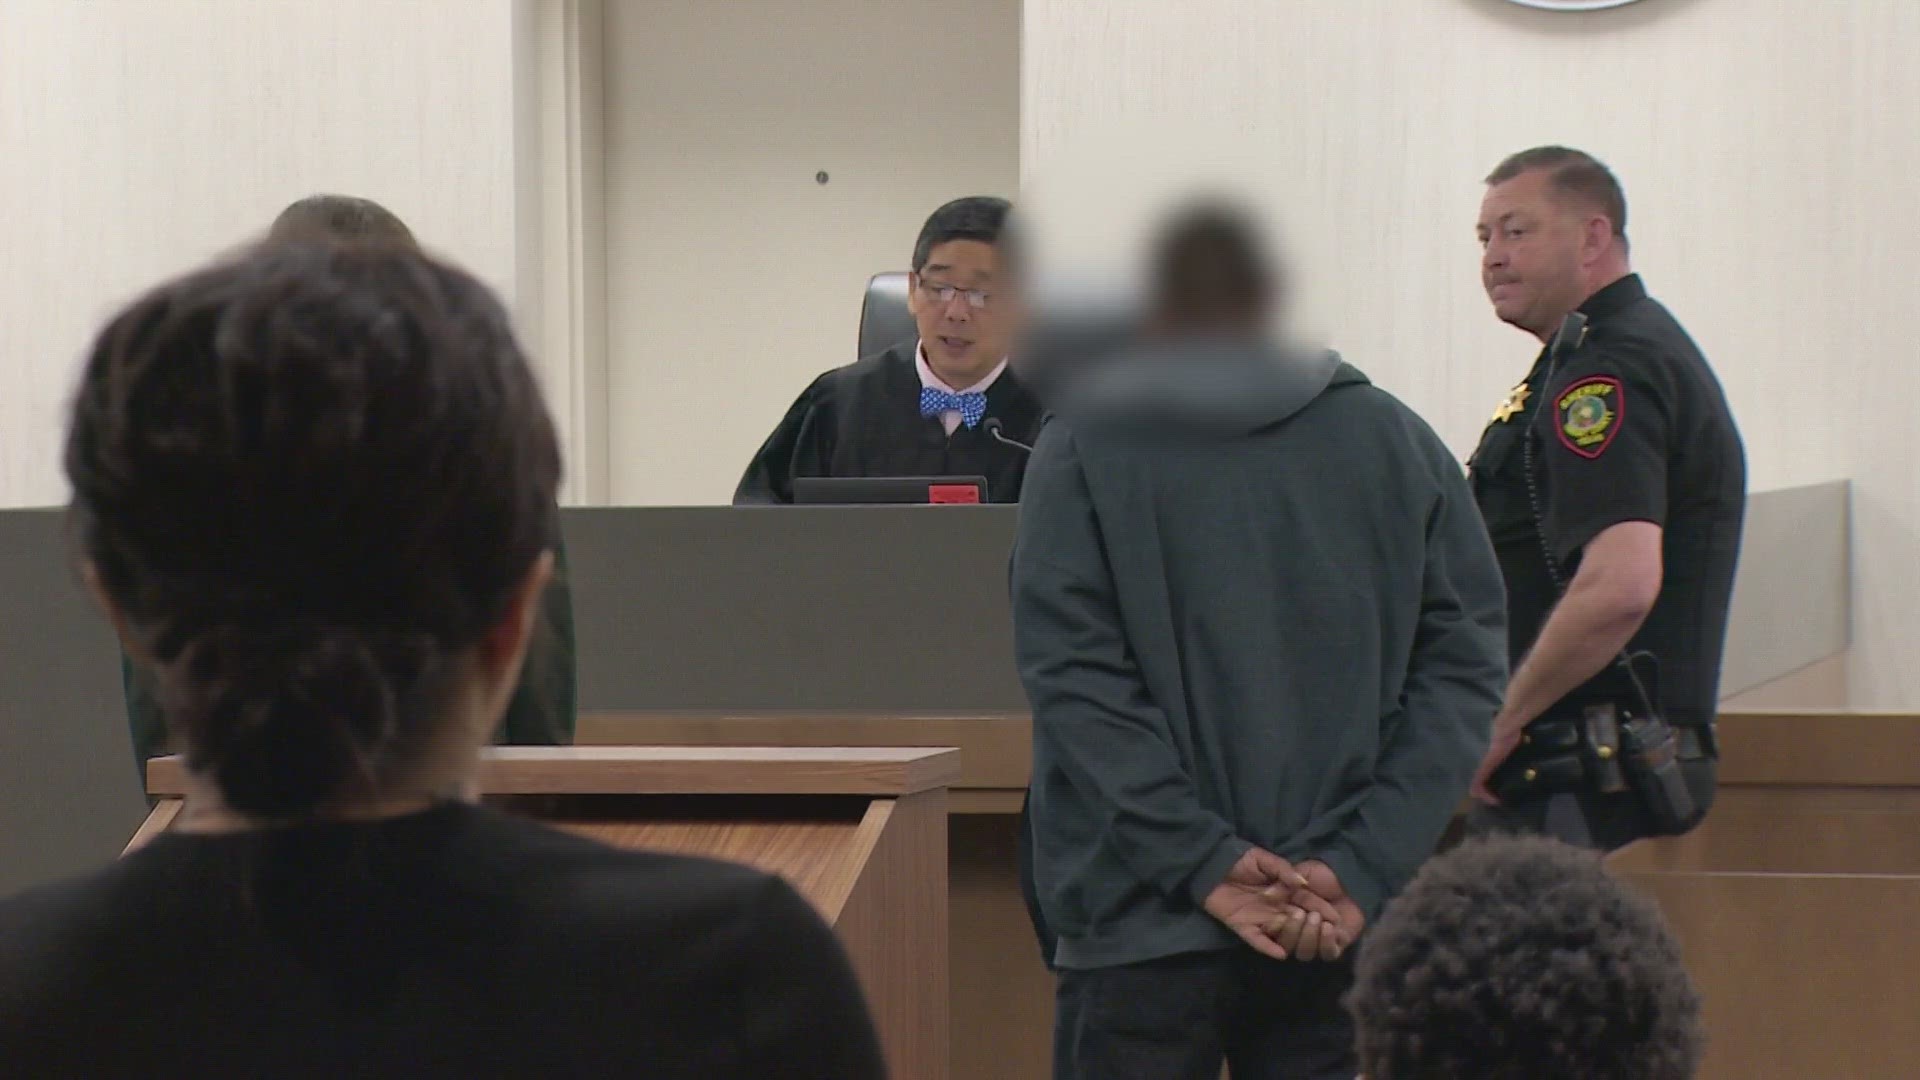 A hearing for the 15-year-old suspect revealed more details surrounding the incident. Another student was also injured.